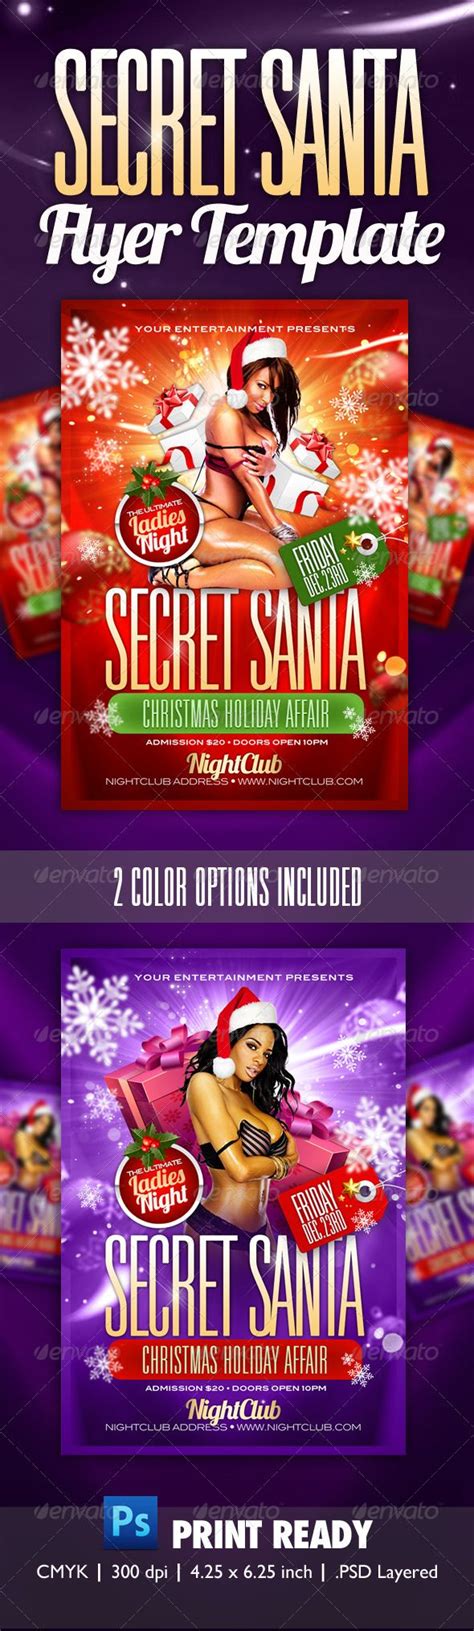 Secret Santa Party Flyer Template Clubs And Parties Events Party